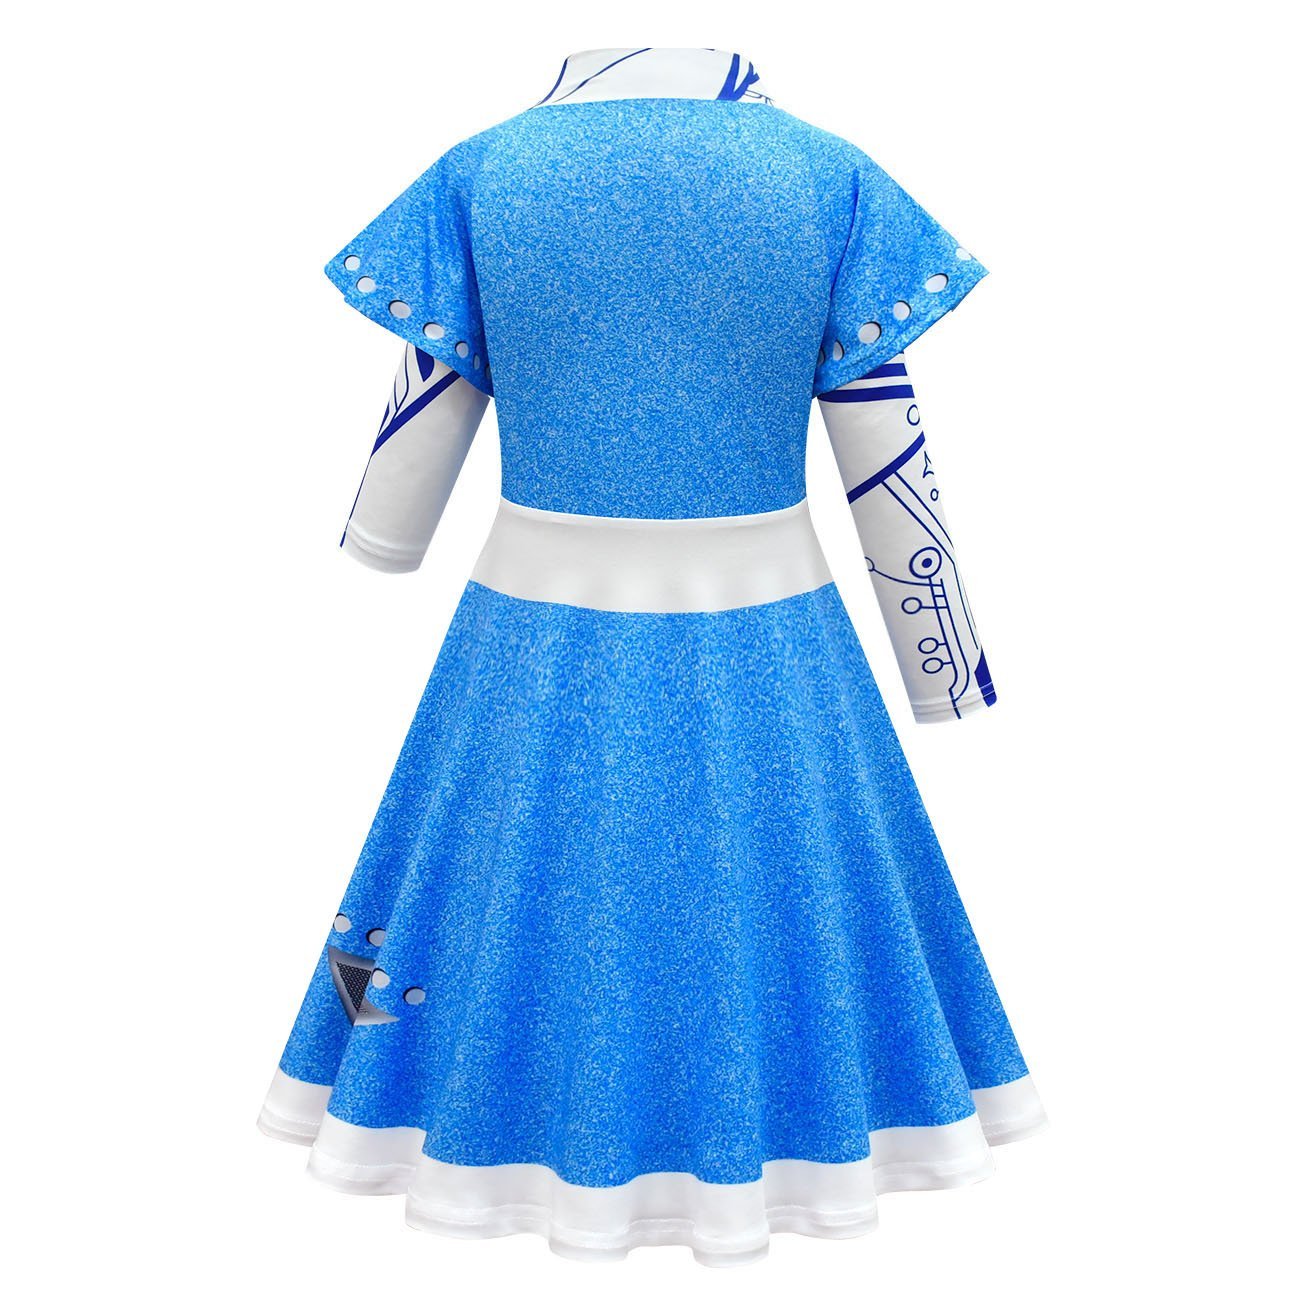 Girls' Zombie High School 3 Cosplay Costumes Halloween Outfit Dress For Kids